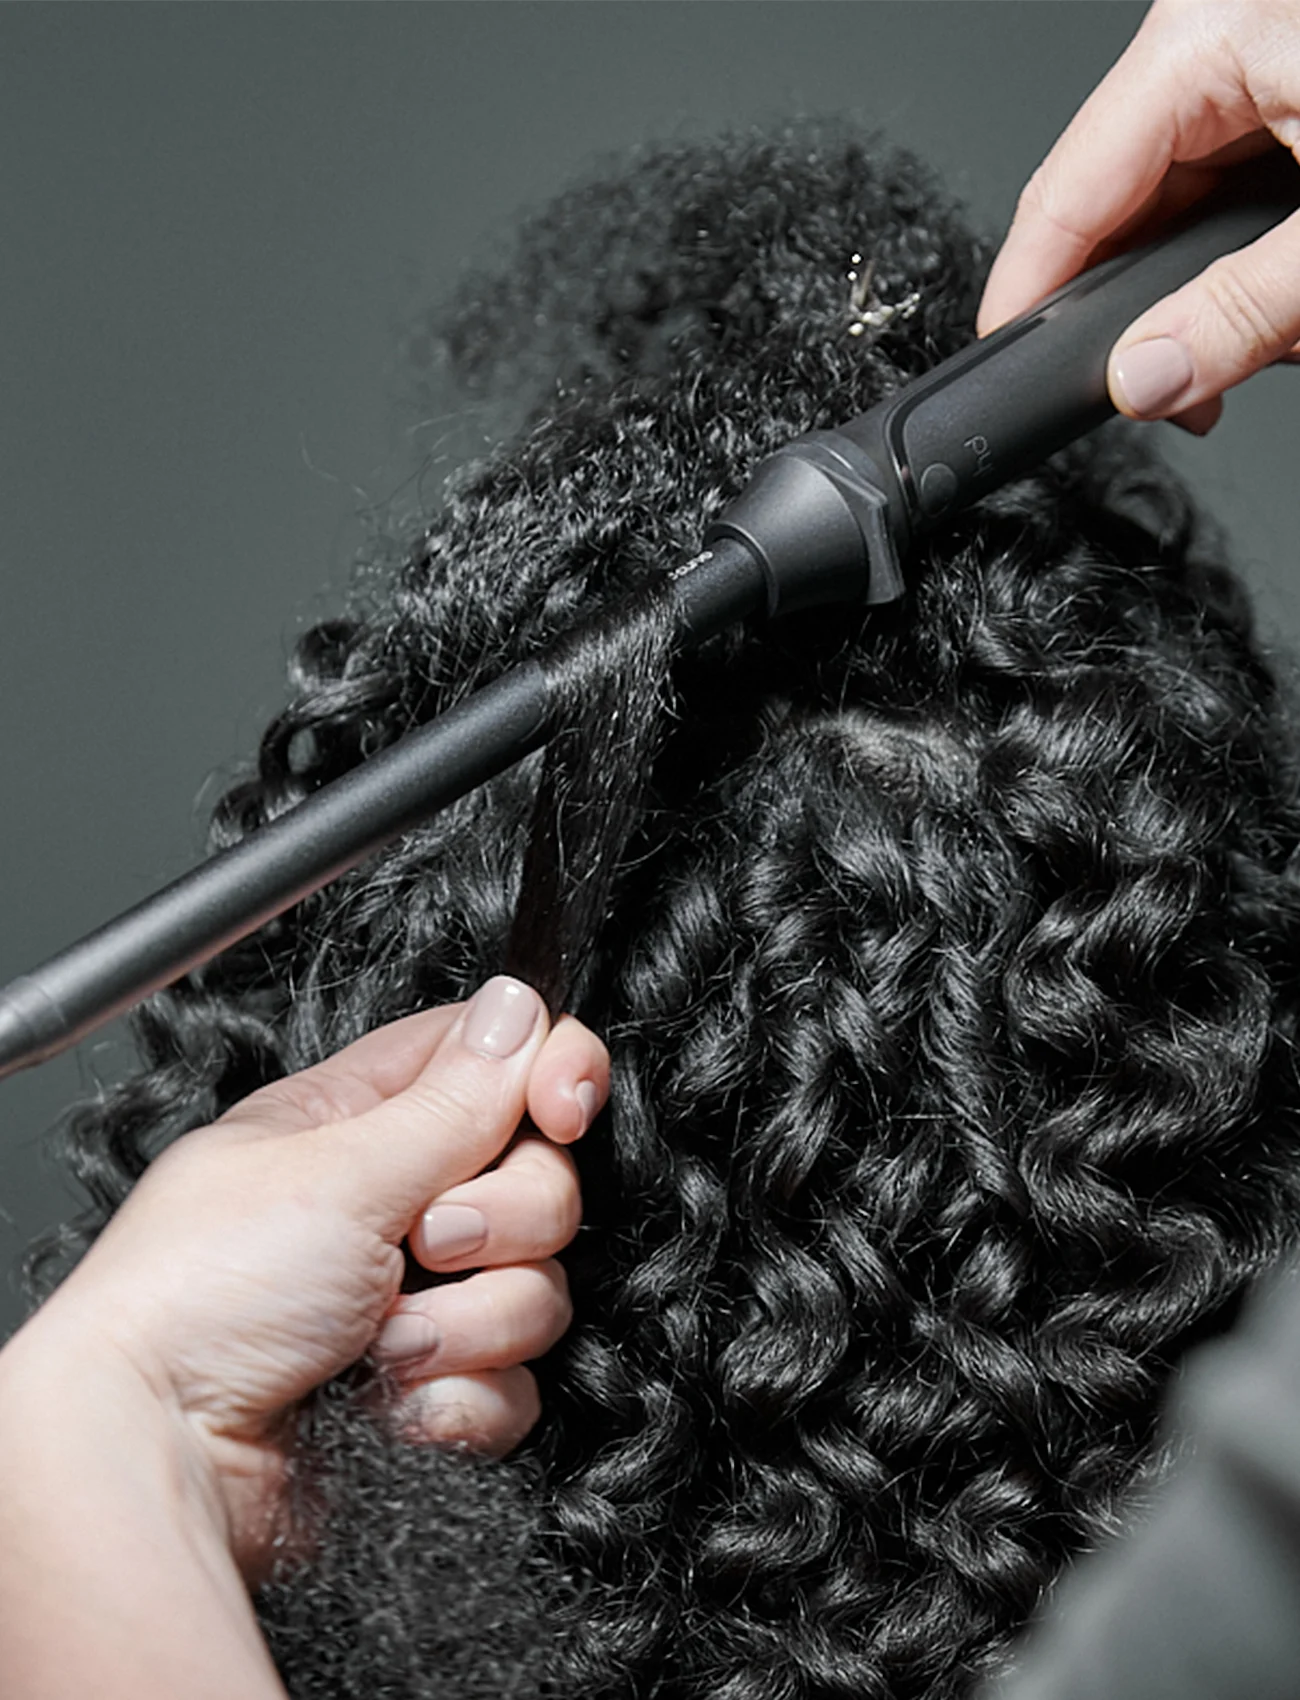 ghd - GHD CURVE® THIN WAND - hiustenkihartimet - no color - 0